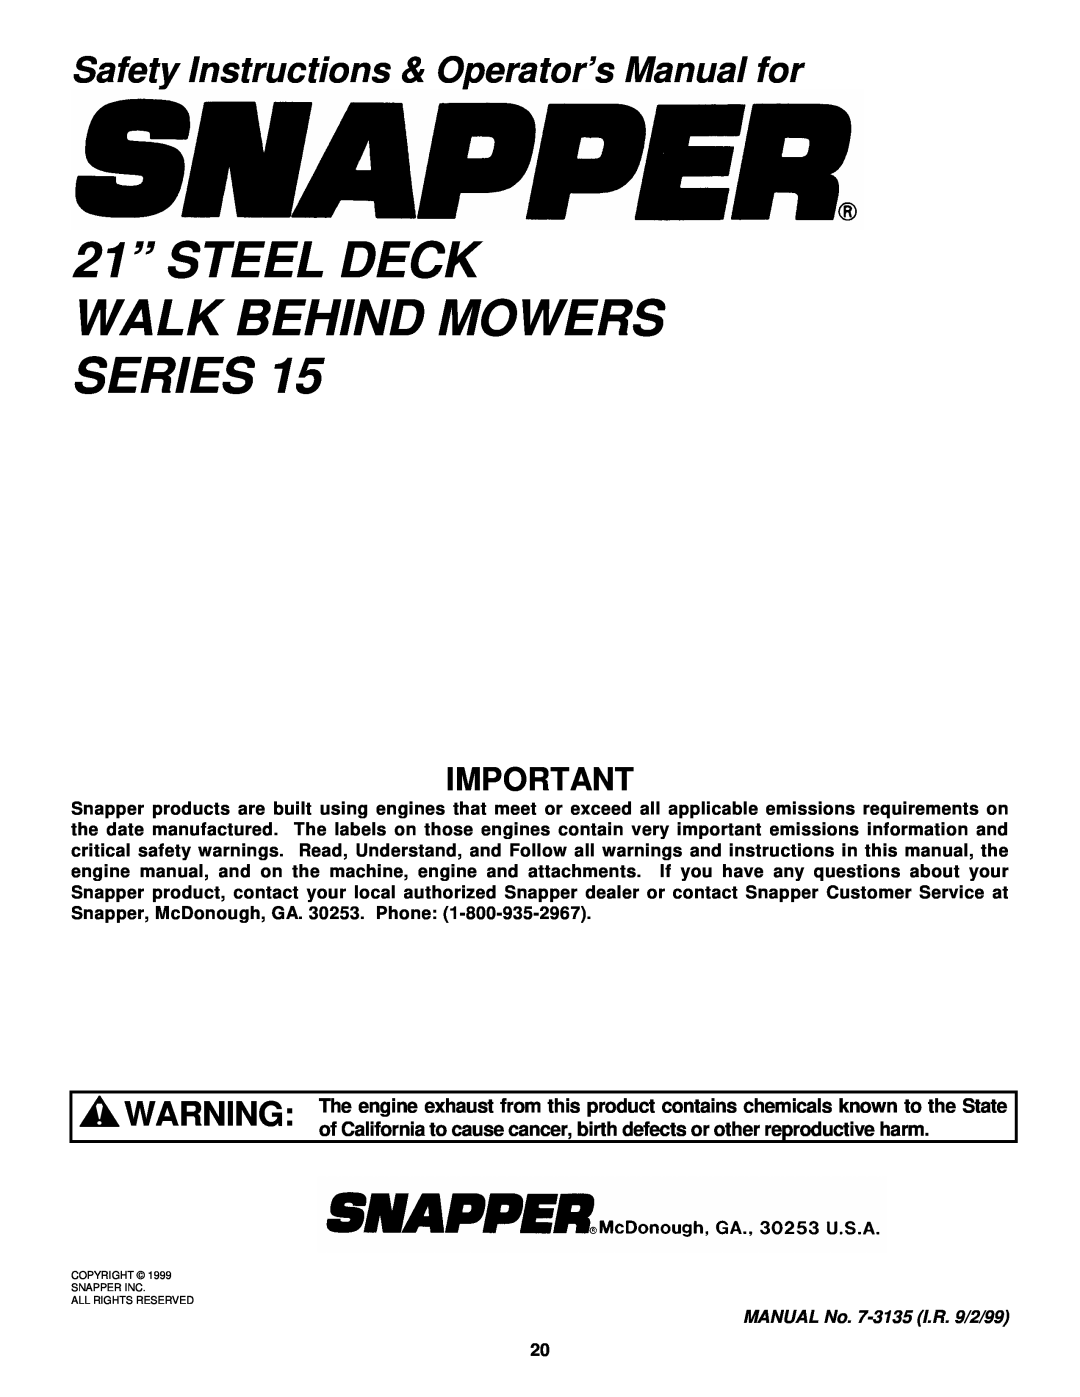 Snapper 215015 21” STEEL DECK WALK BEHIND MOWERS SERIES, Safety Instructions & Operator’s Manual for 